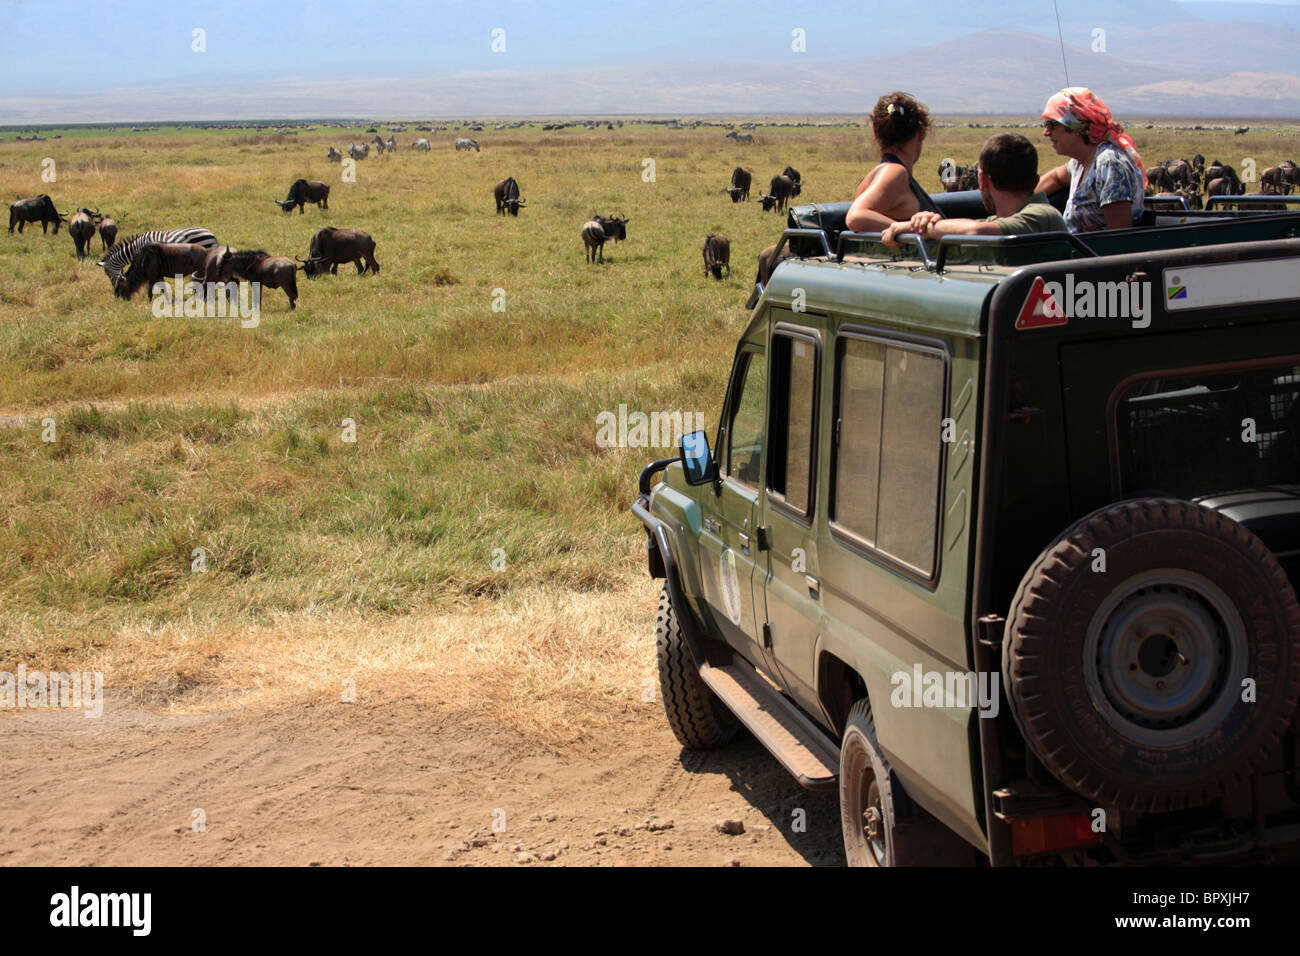 Tourists in a car at Ngorongoro conservation area, Tanzania Stock Photo